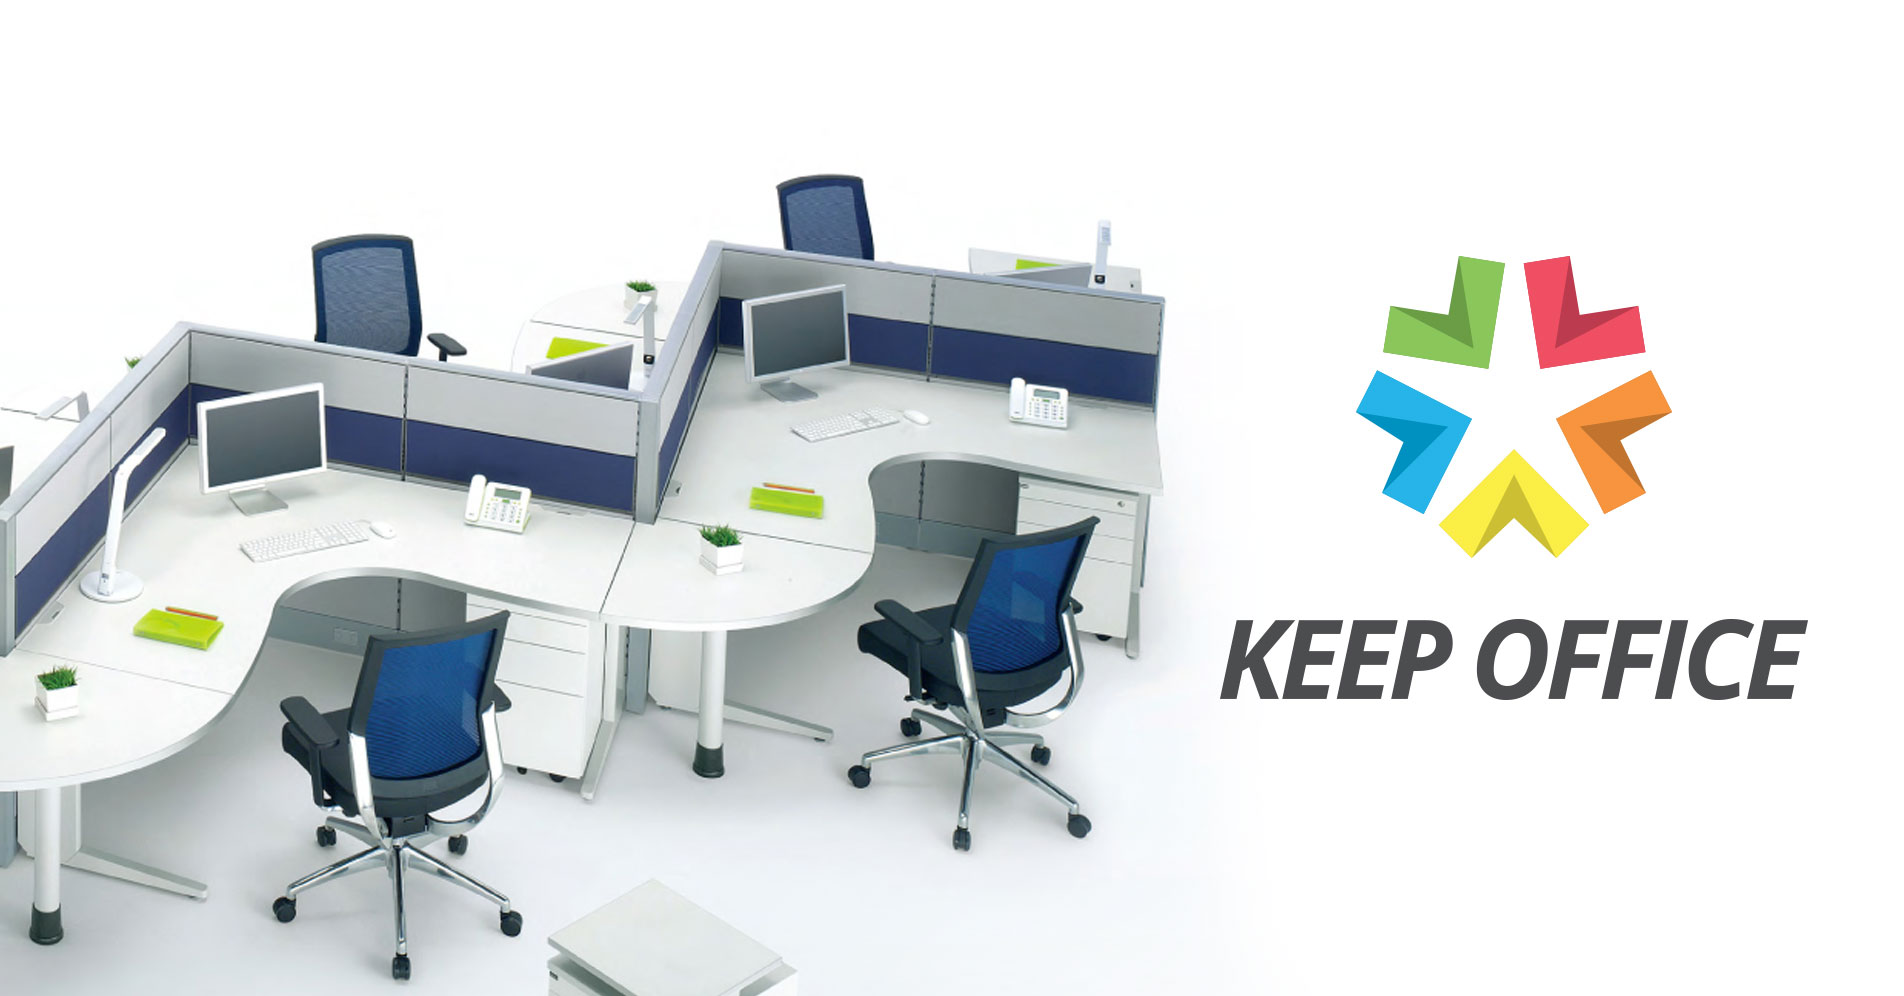 Keep Office office furniture